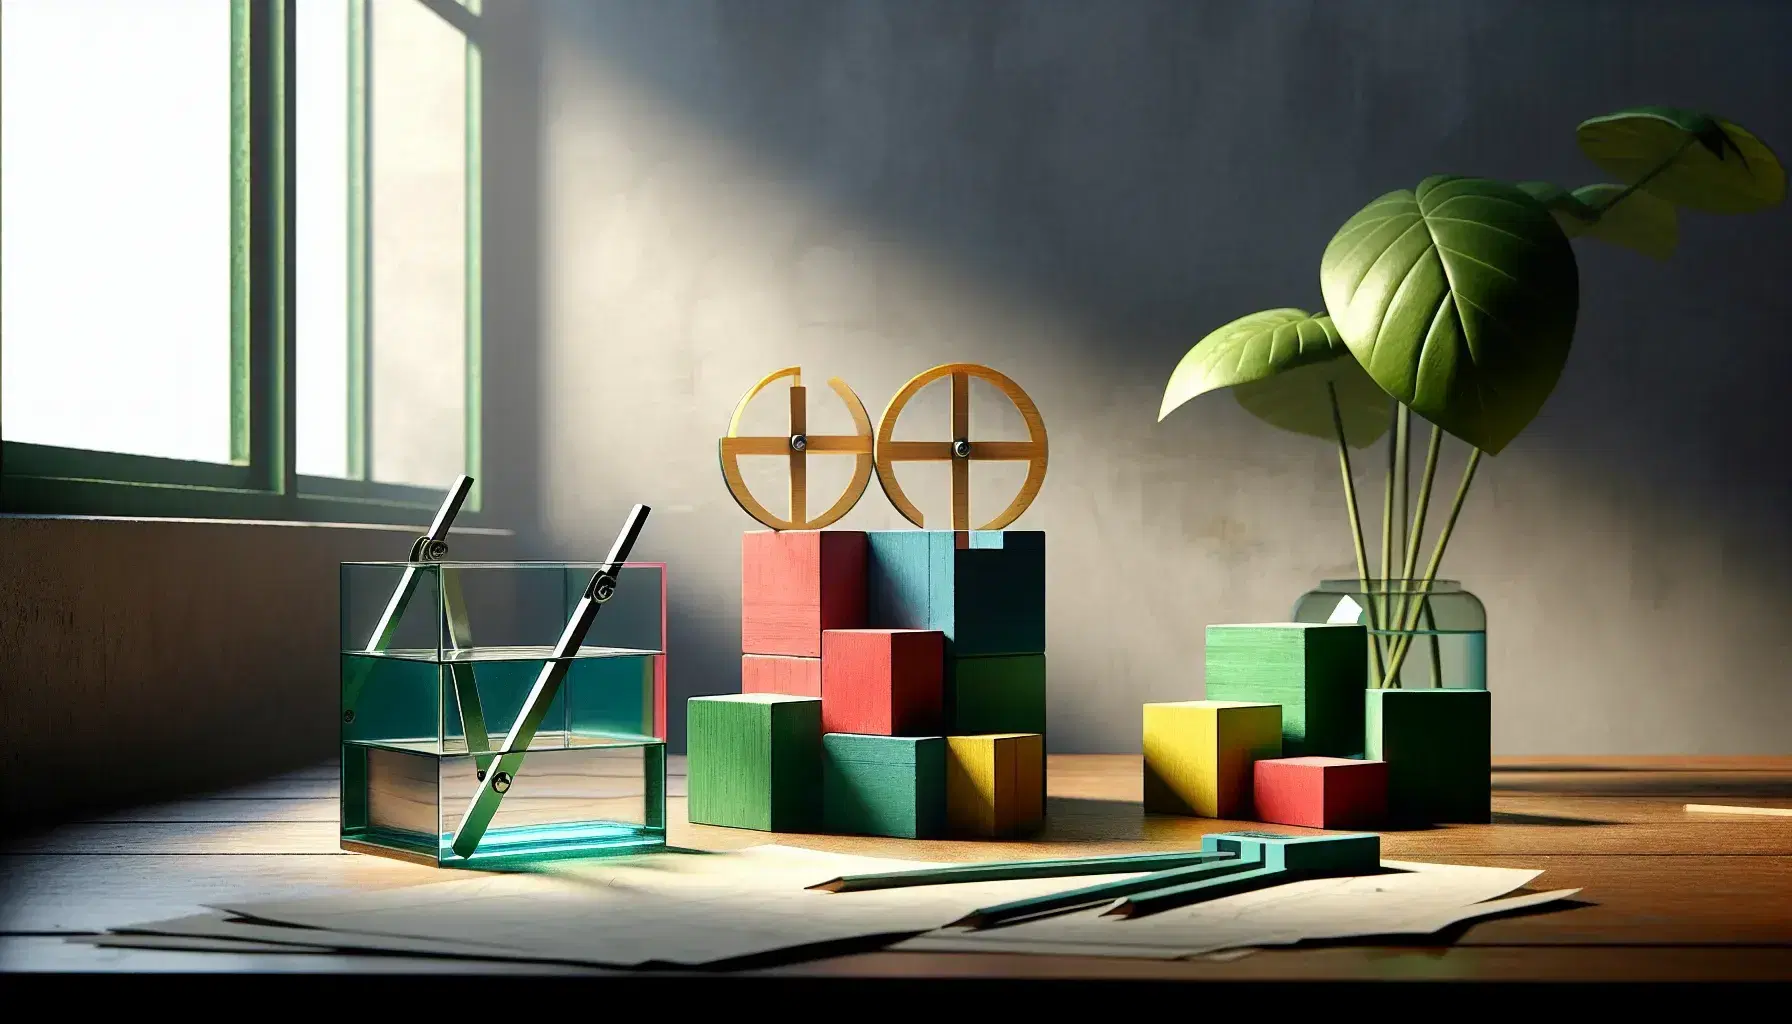 Serene classroom with geometric shapes on a table, a green chalkboard eraser, colorful wooden blocks, a glass container with leaves, and a compass on paper.